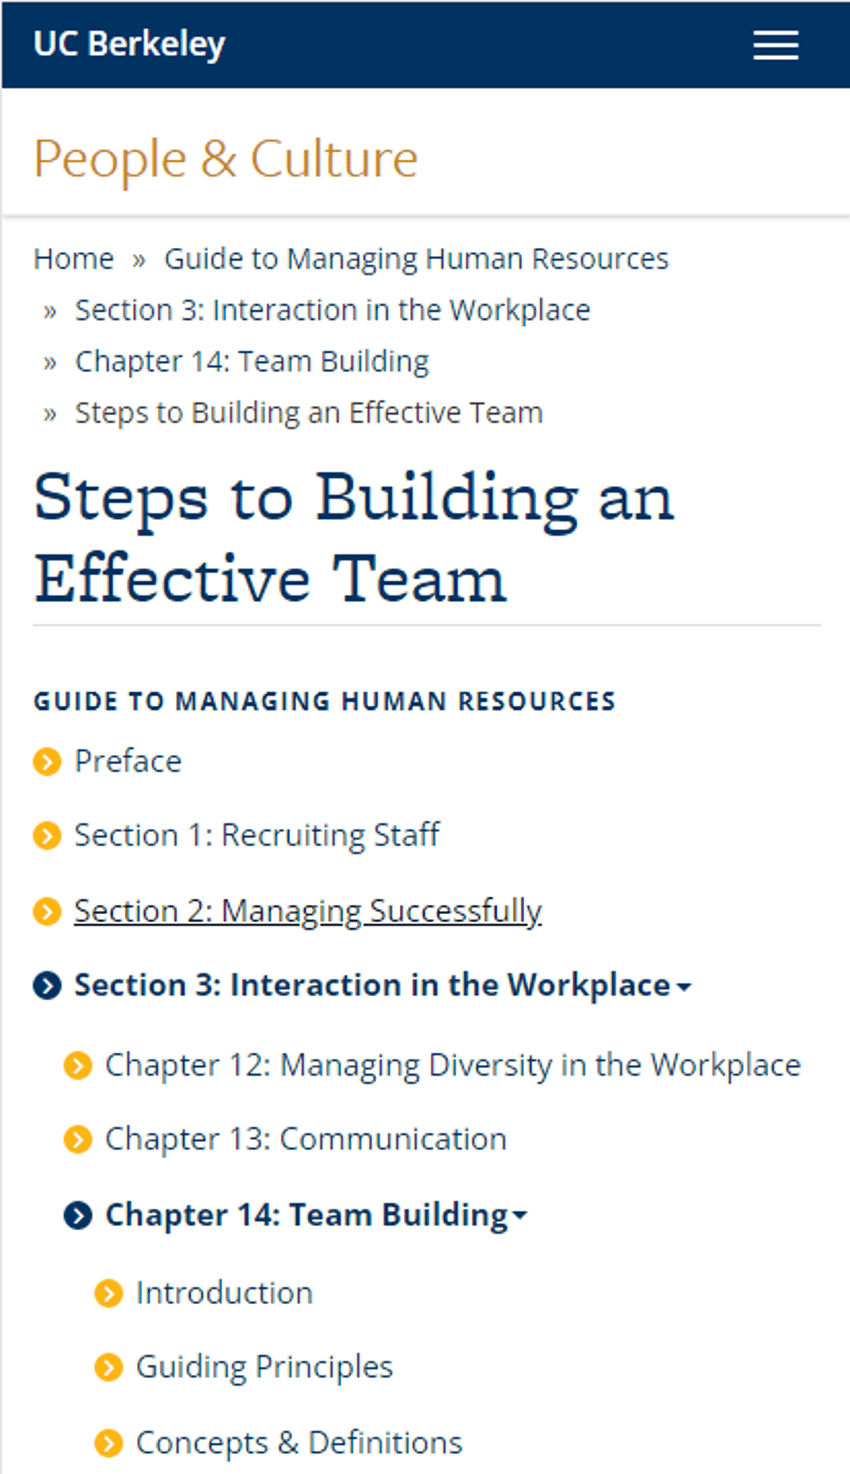 check out the full post [here](https://hr.berkeley.edu/hr-network/central-guide-managing-hr/managing-hr/interaction/team-building/steps)